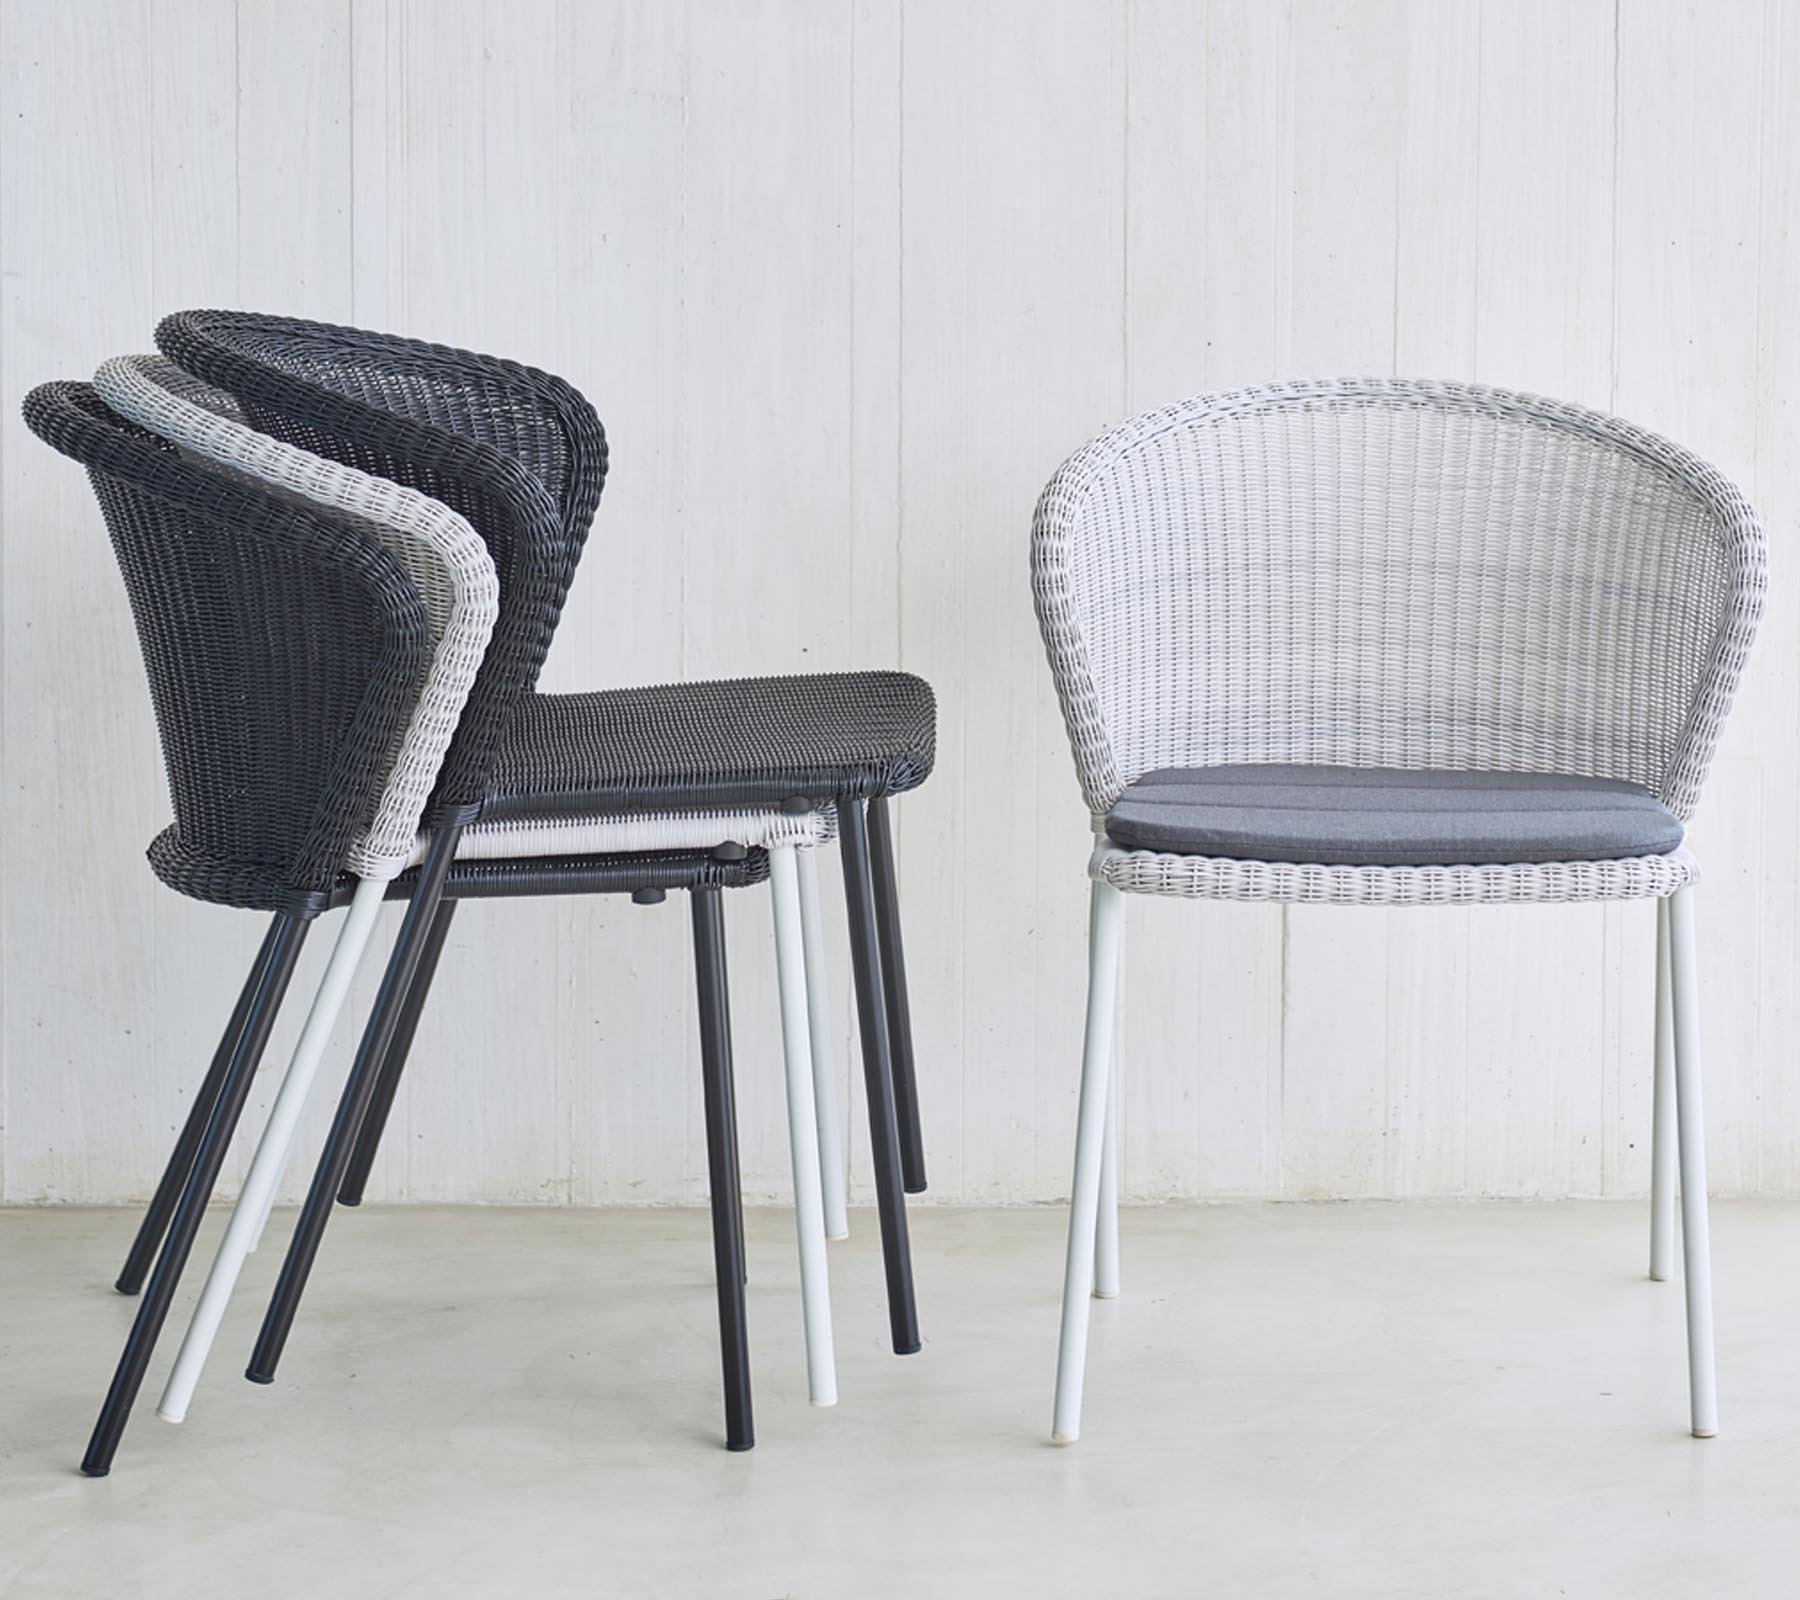 Lean Chair from Cane-line, designed by Welling/Ludvik